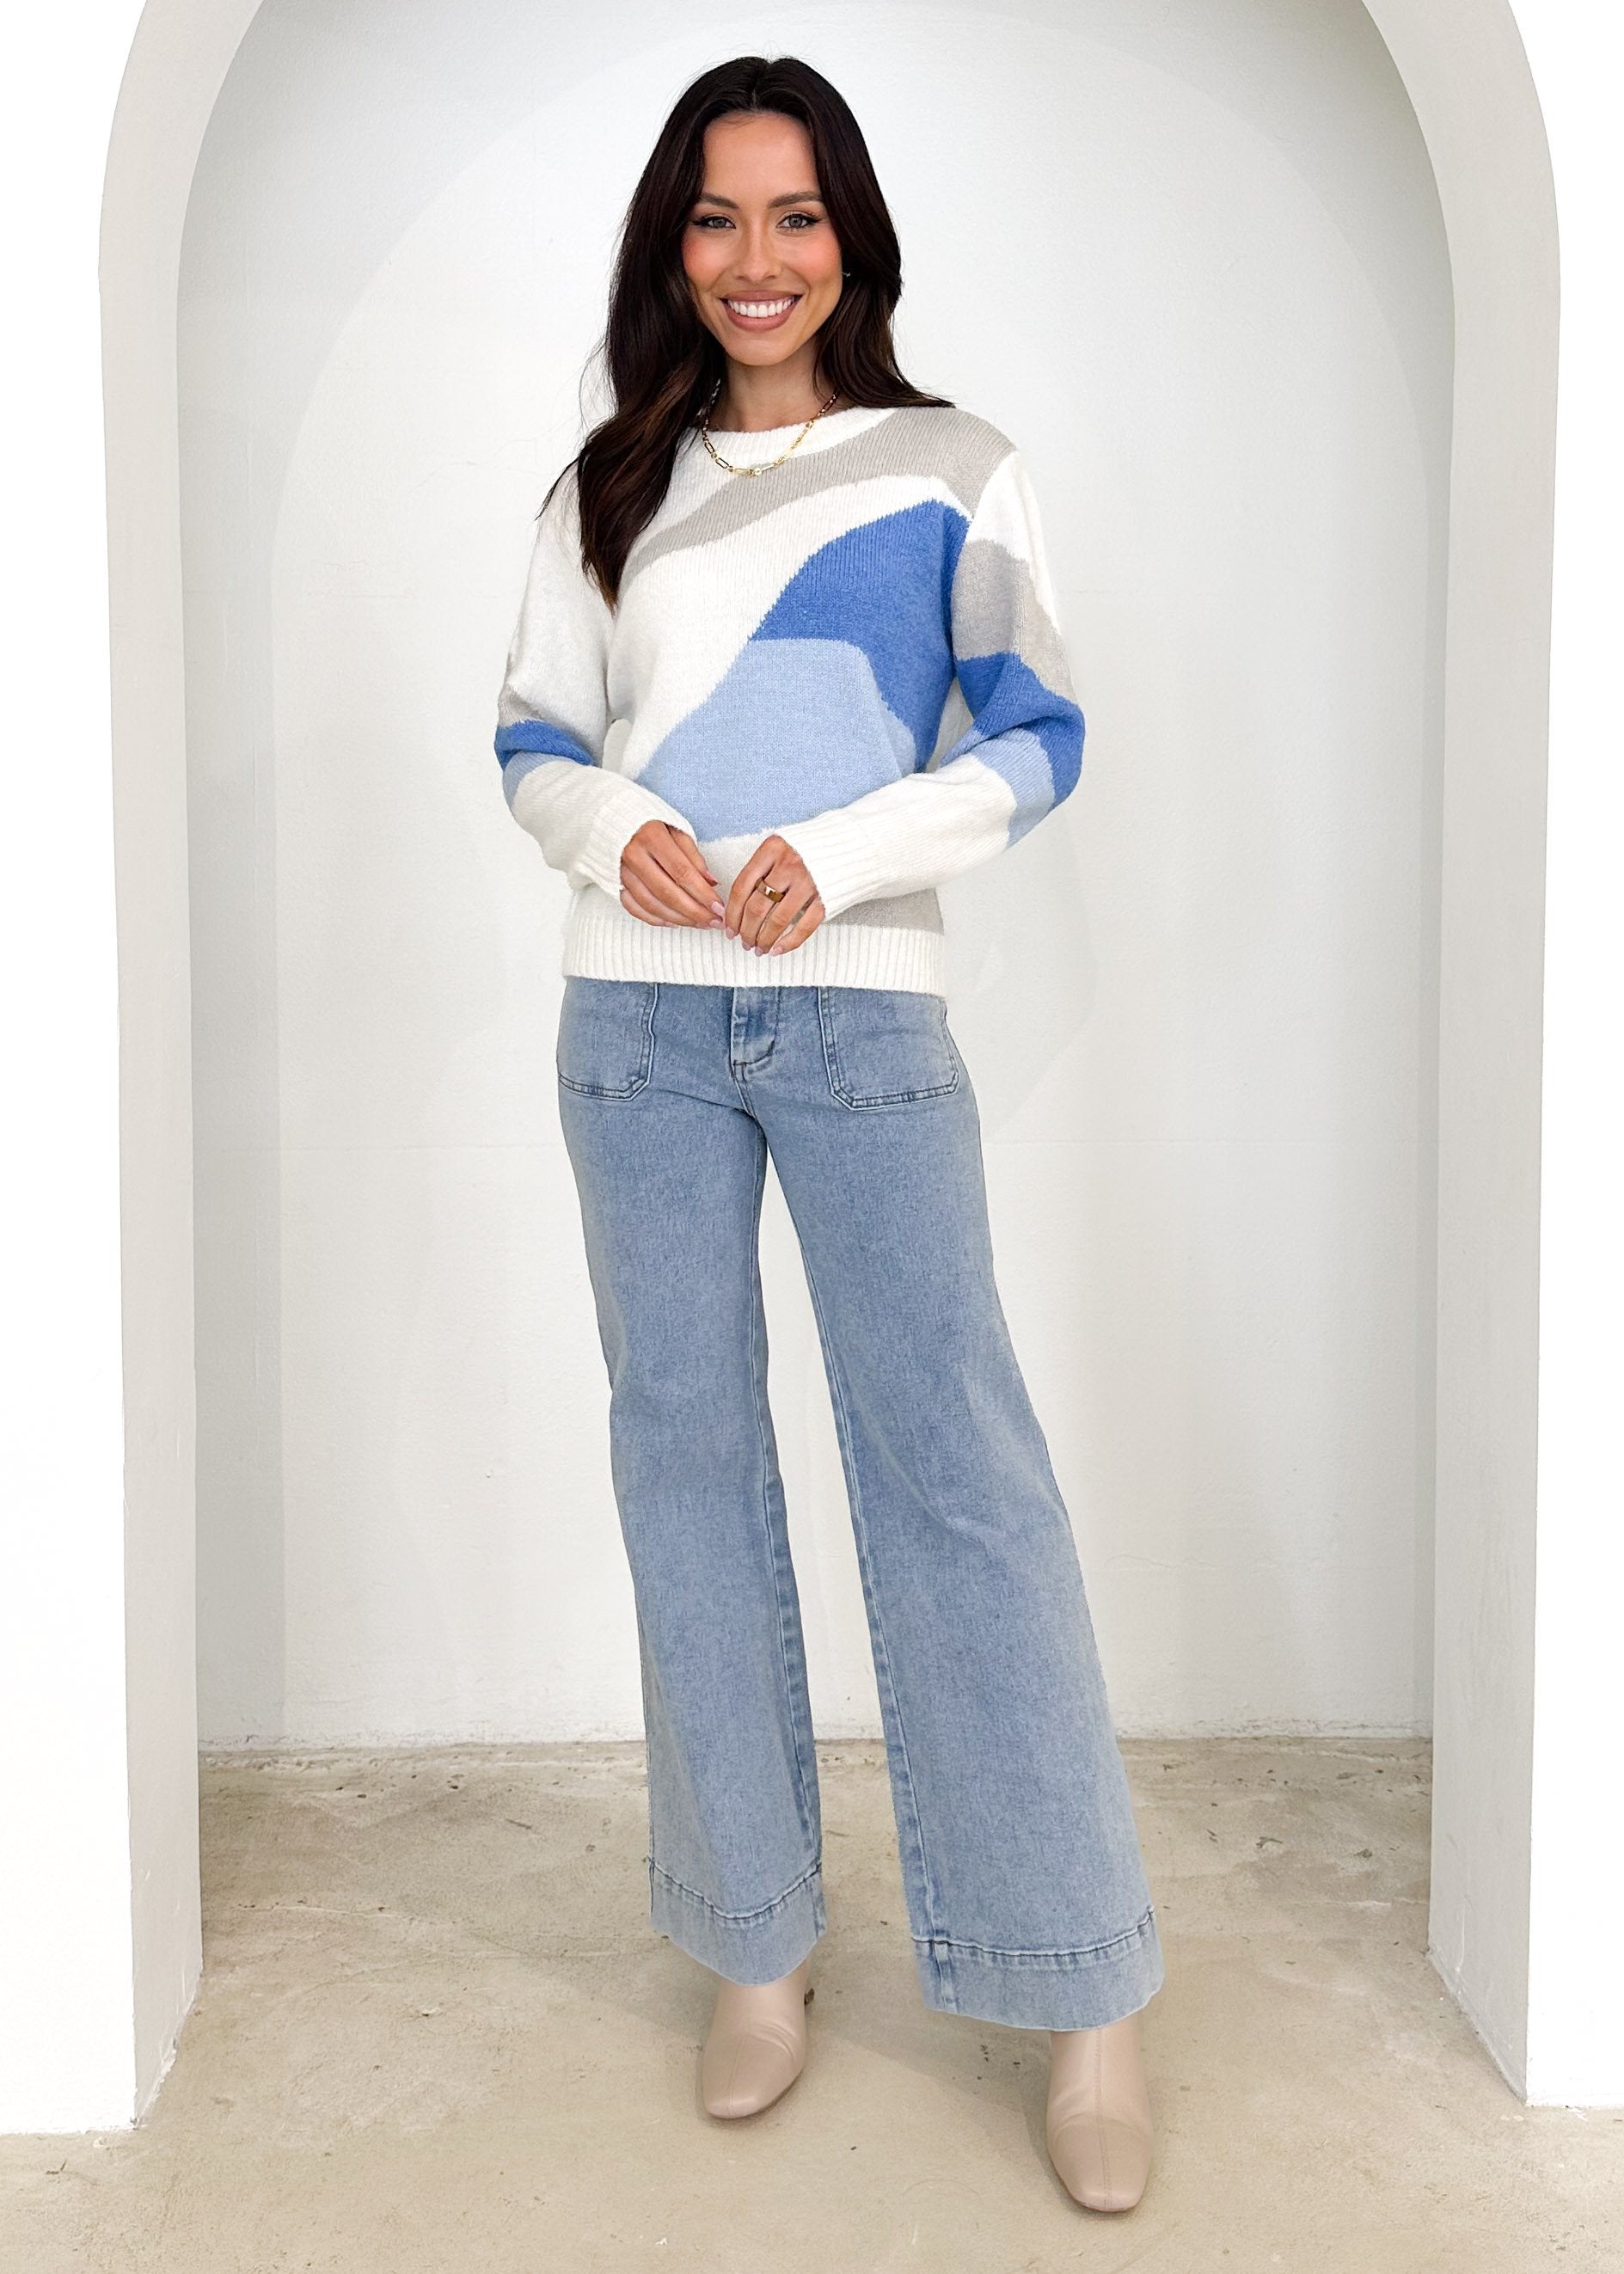 Issarae Sweater - Blue Abstract